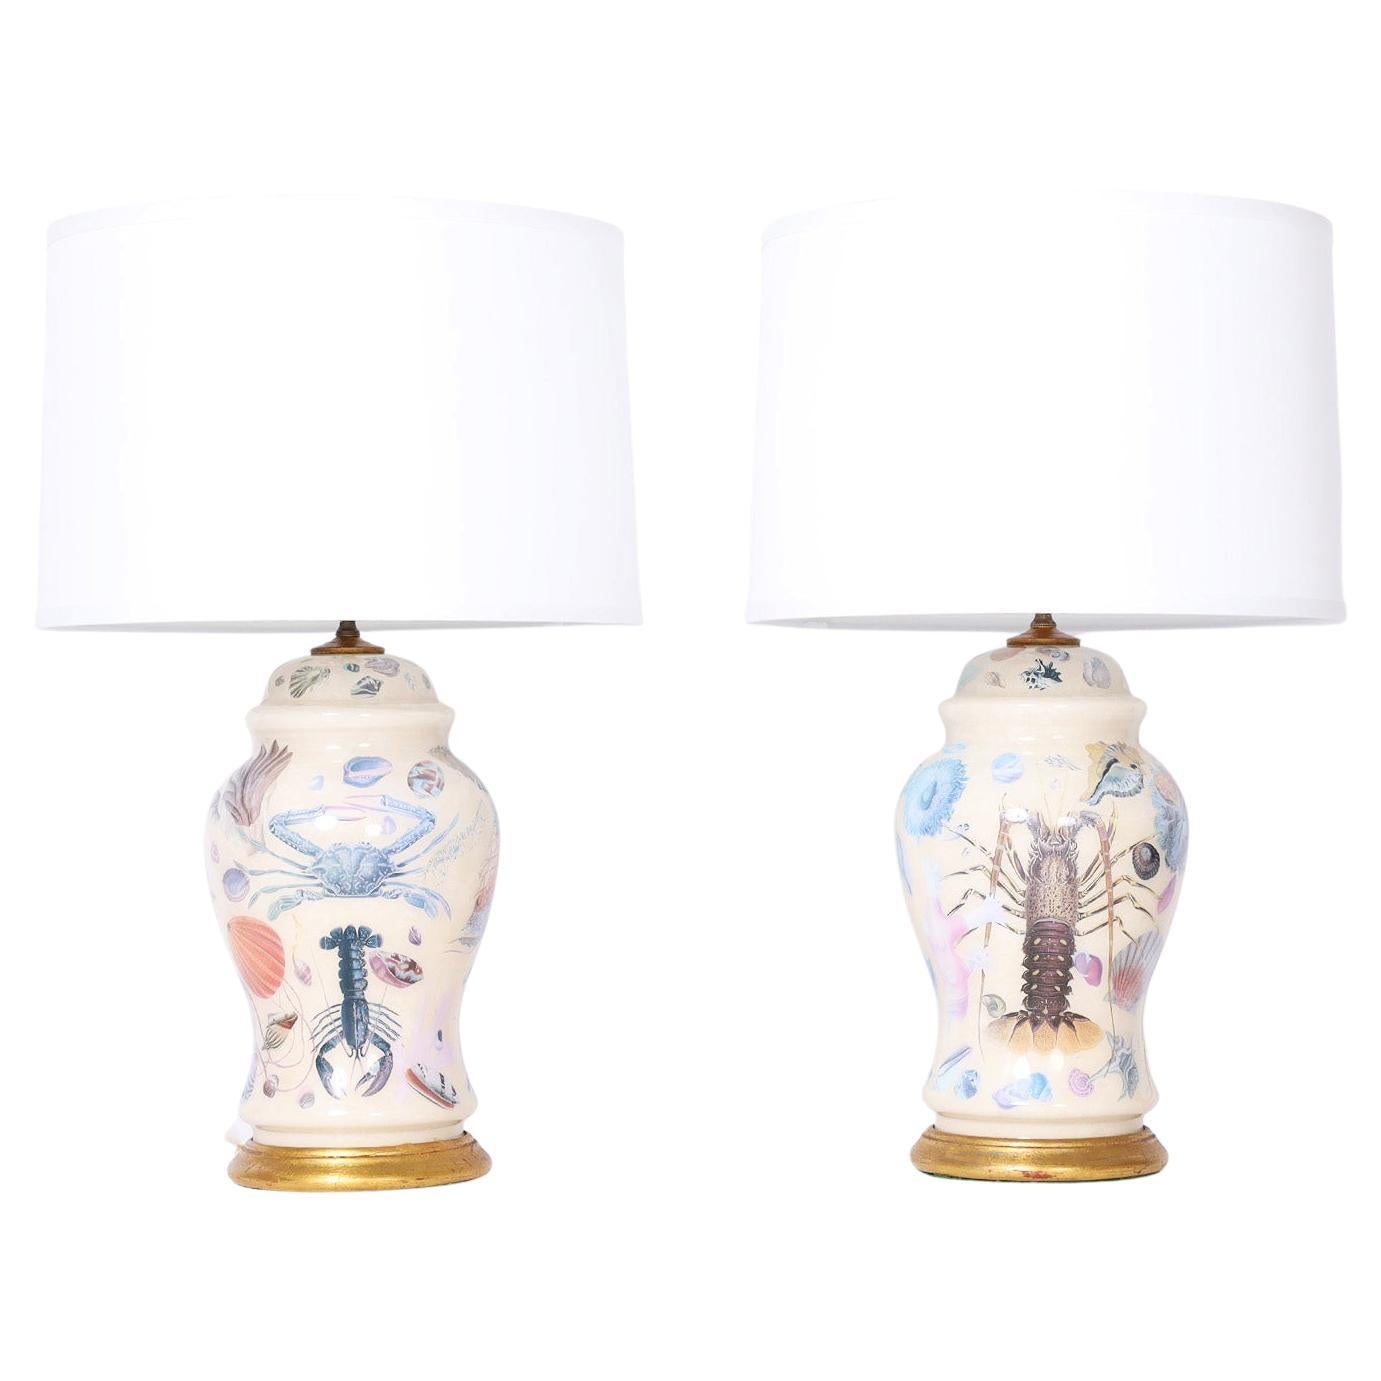 Pair of Reverse Decoupage Table Lamps with Sea Life